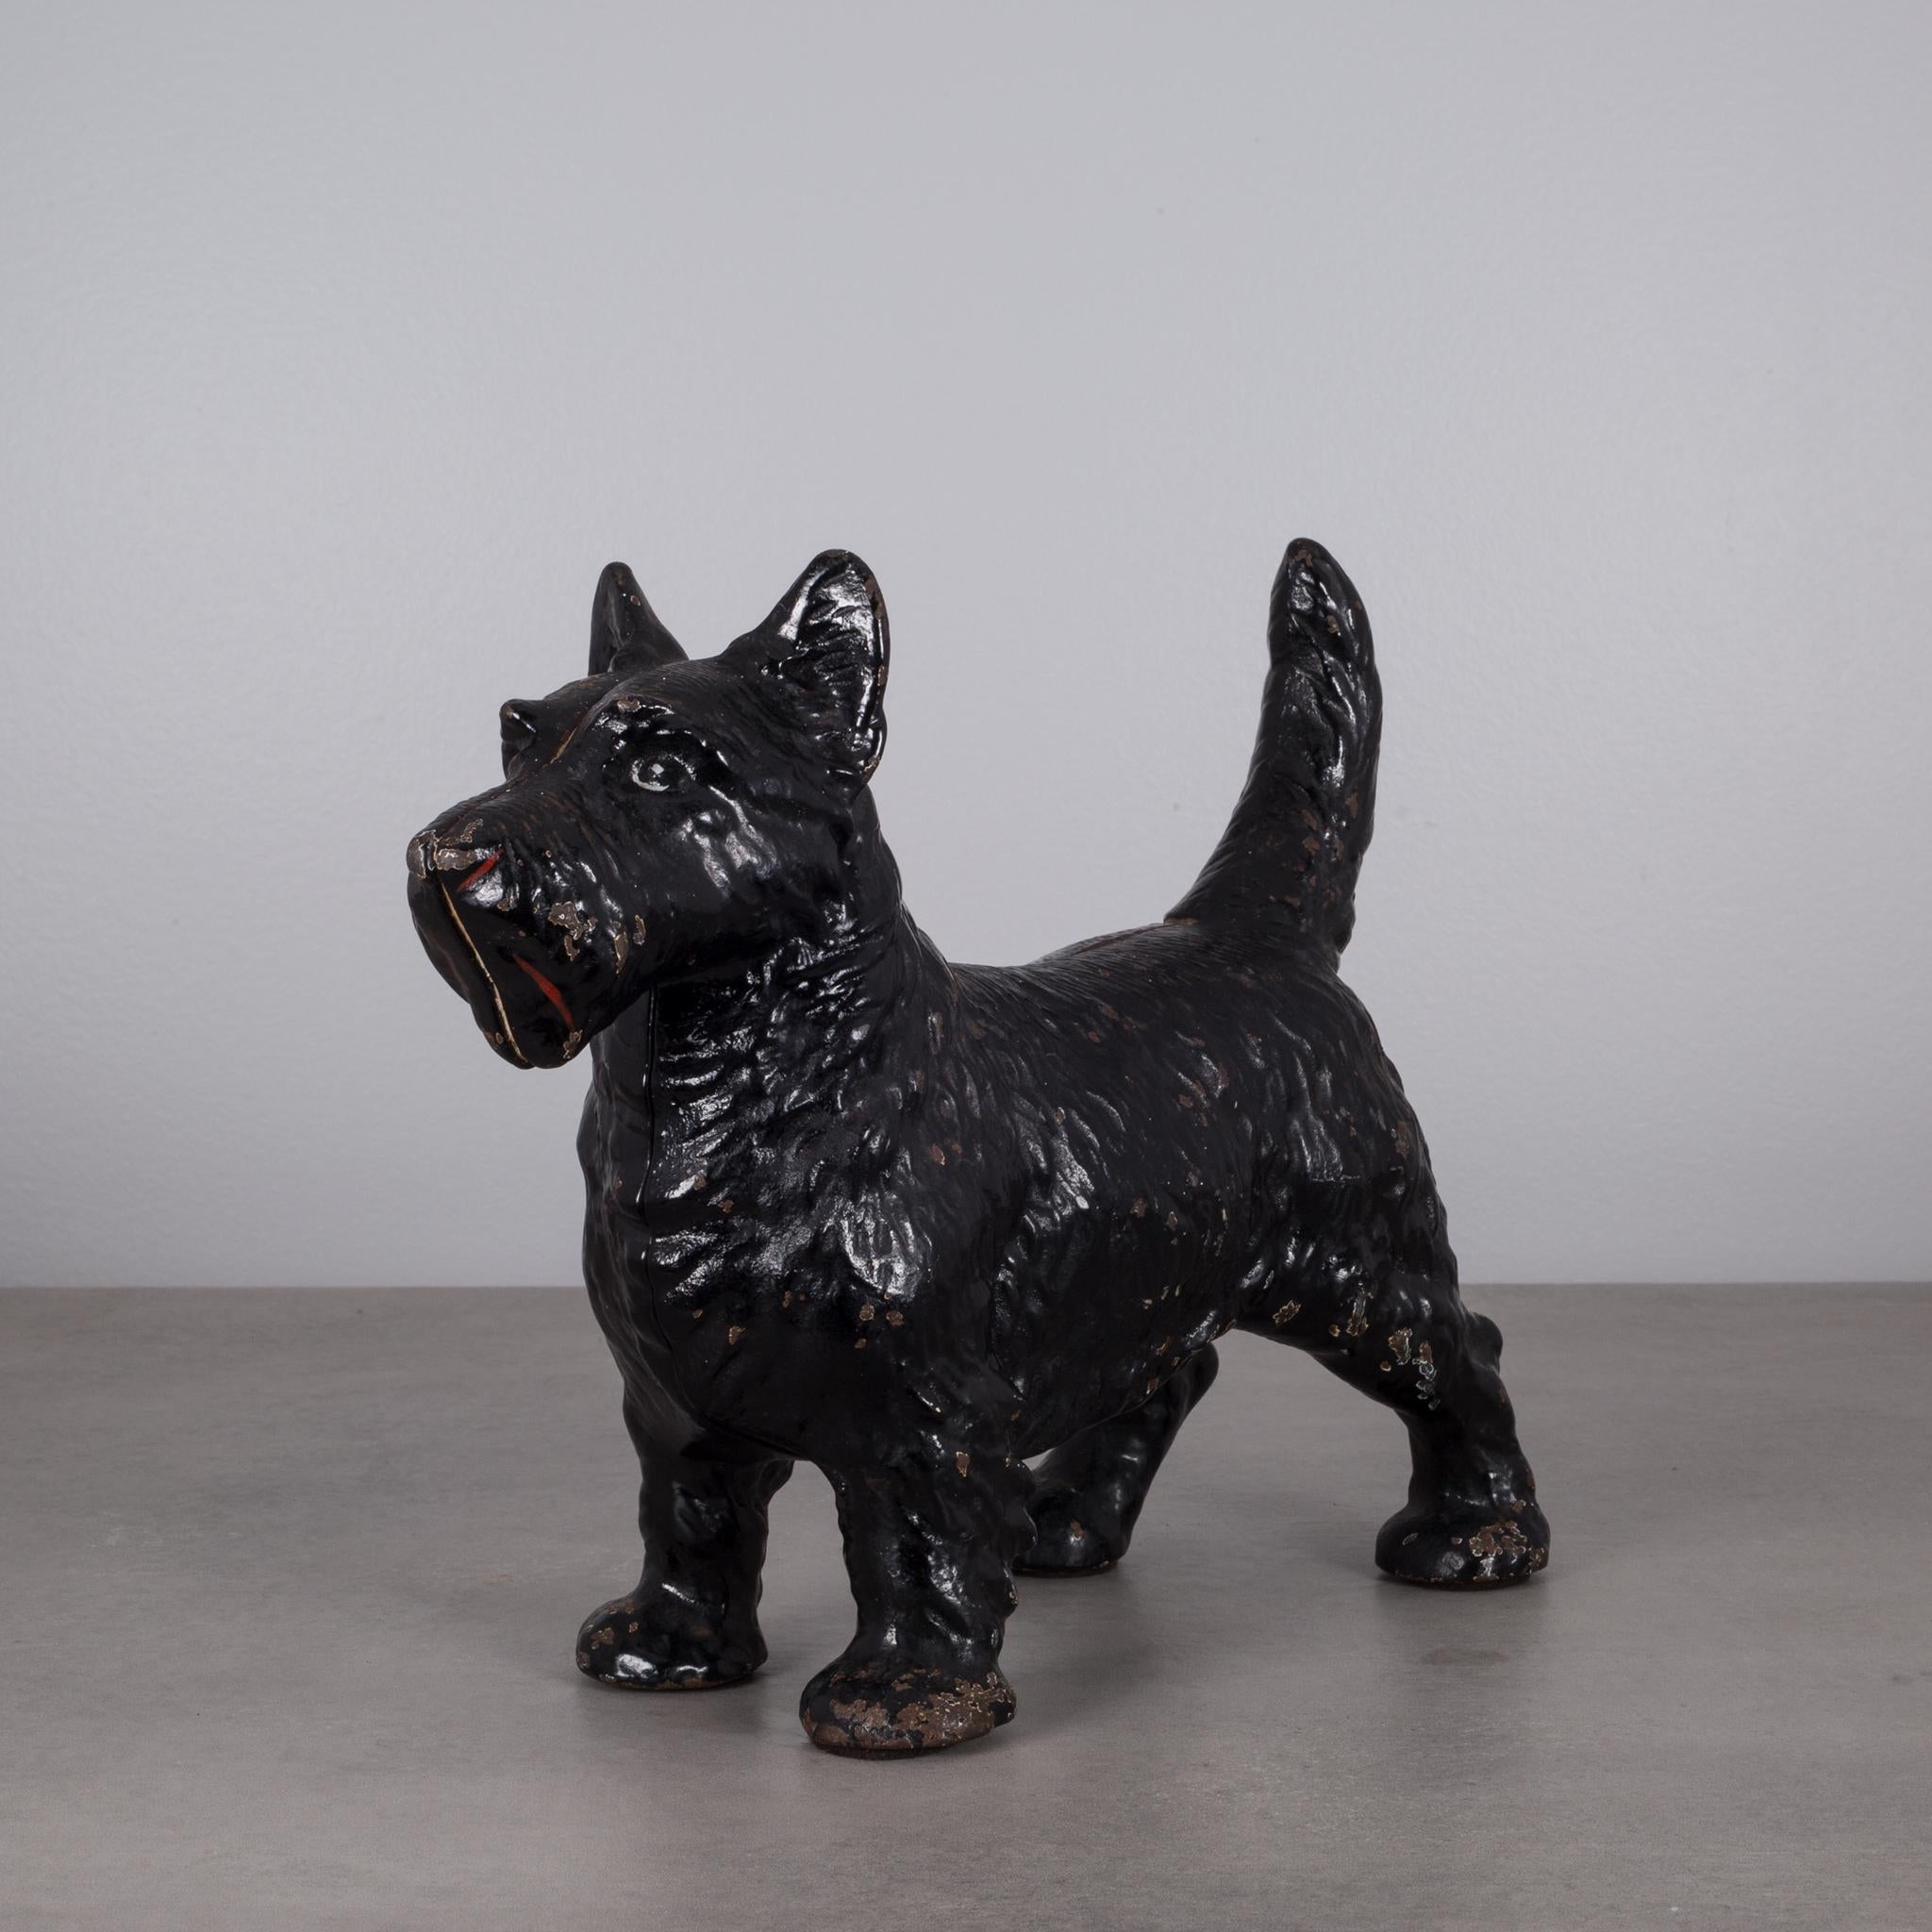 This is an original cast iron Scottish Terrier doorstop manufactured by the Hubley Manufacturing Company in Lancaster Pennsylvania USA. The piece has retained its original hand painted finish and is in excellent condition with the appropriate patina